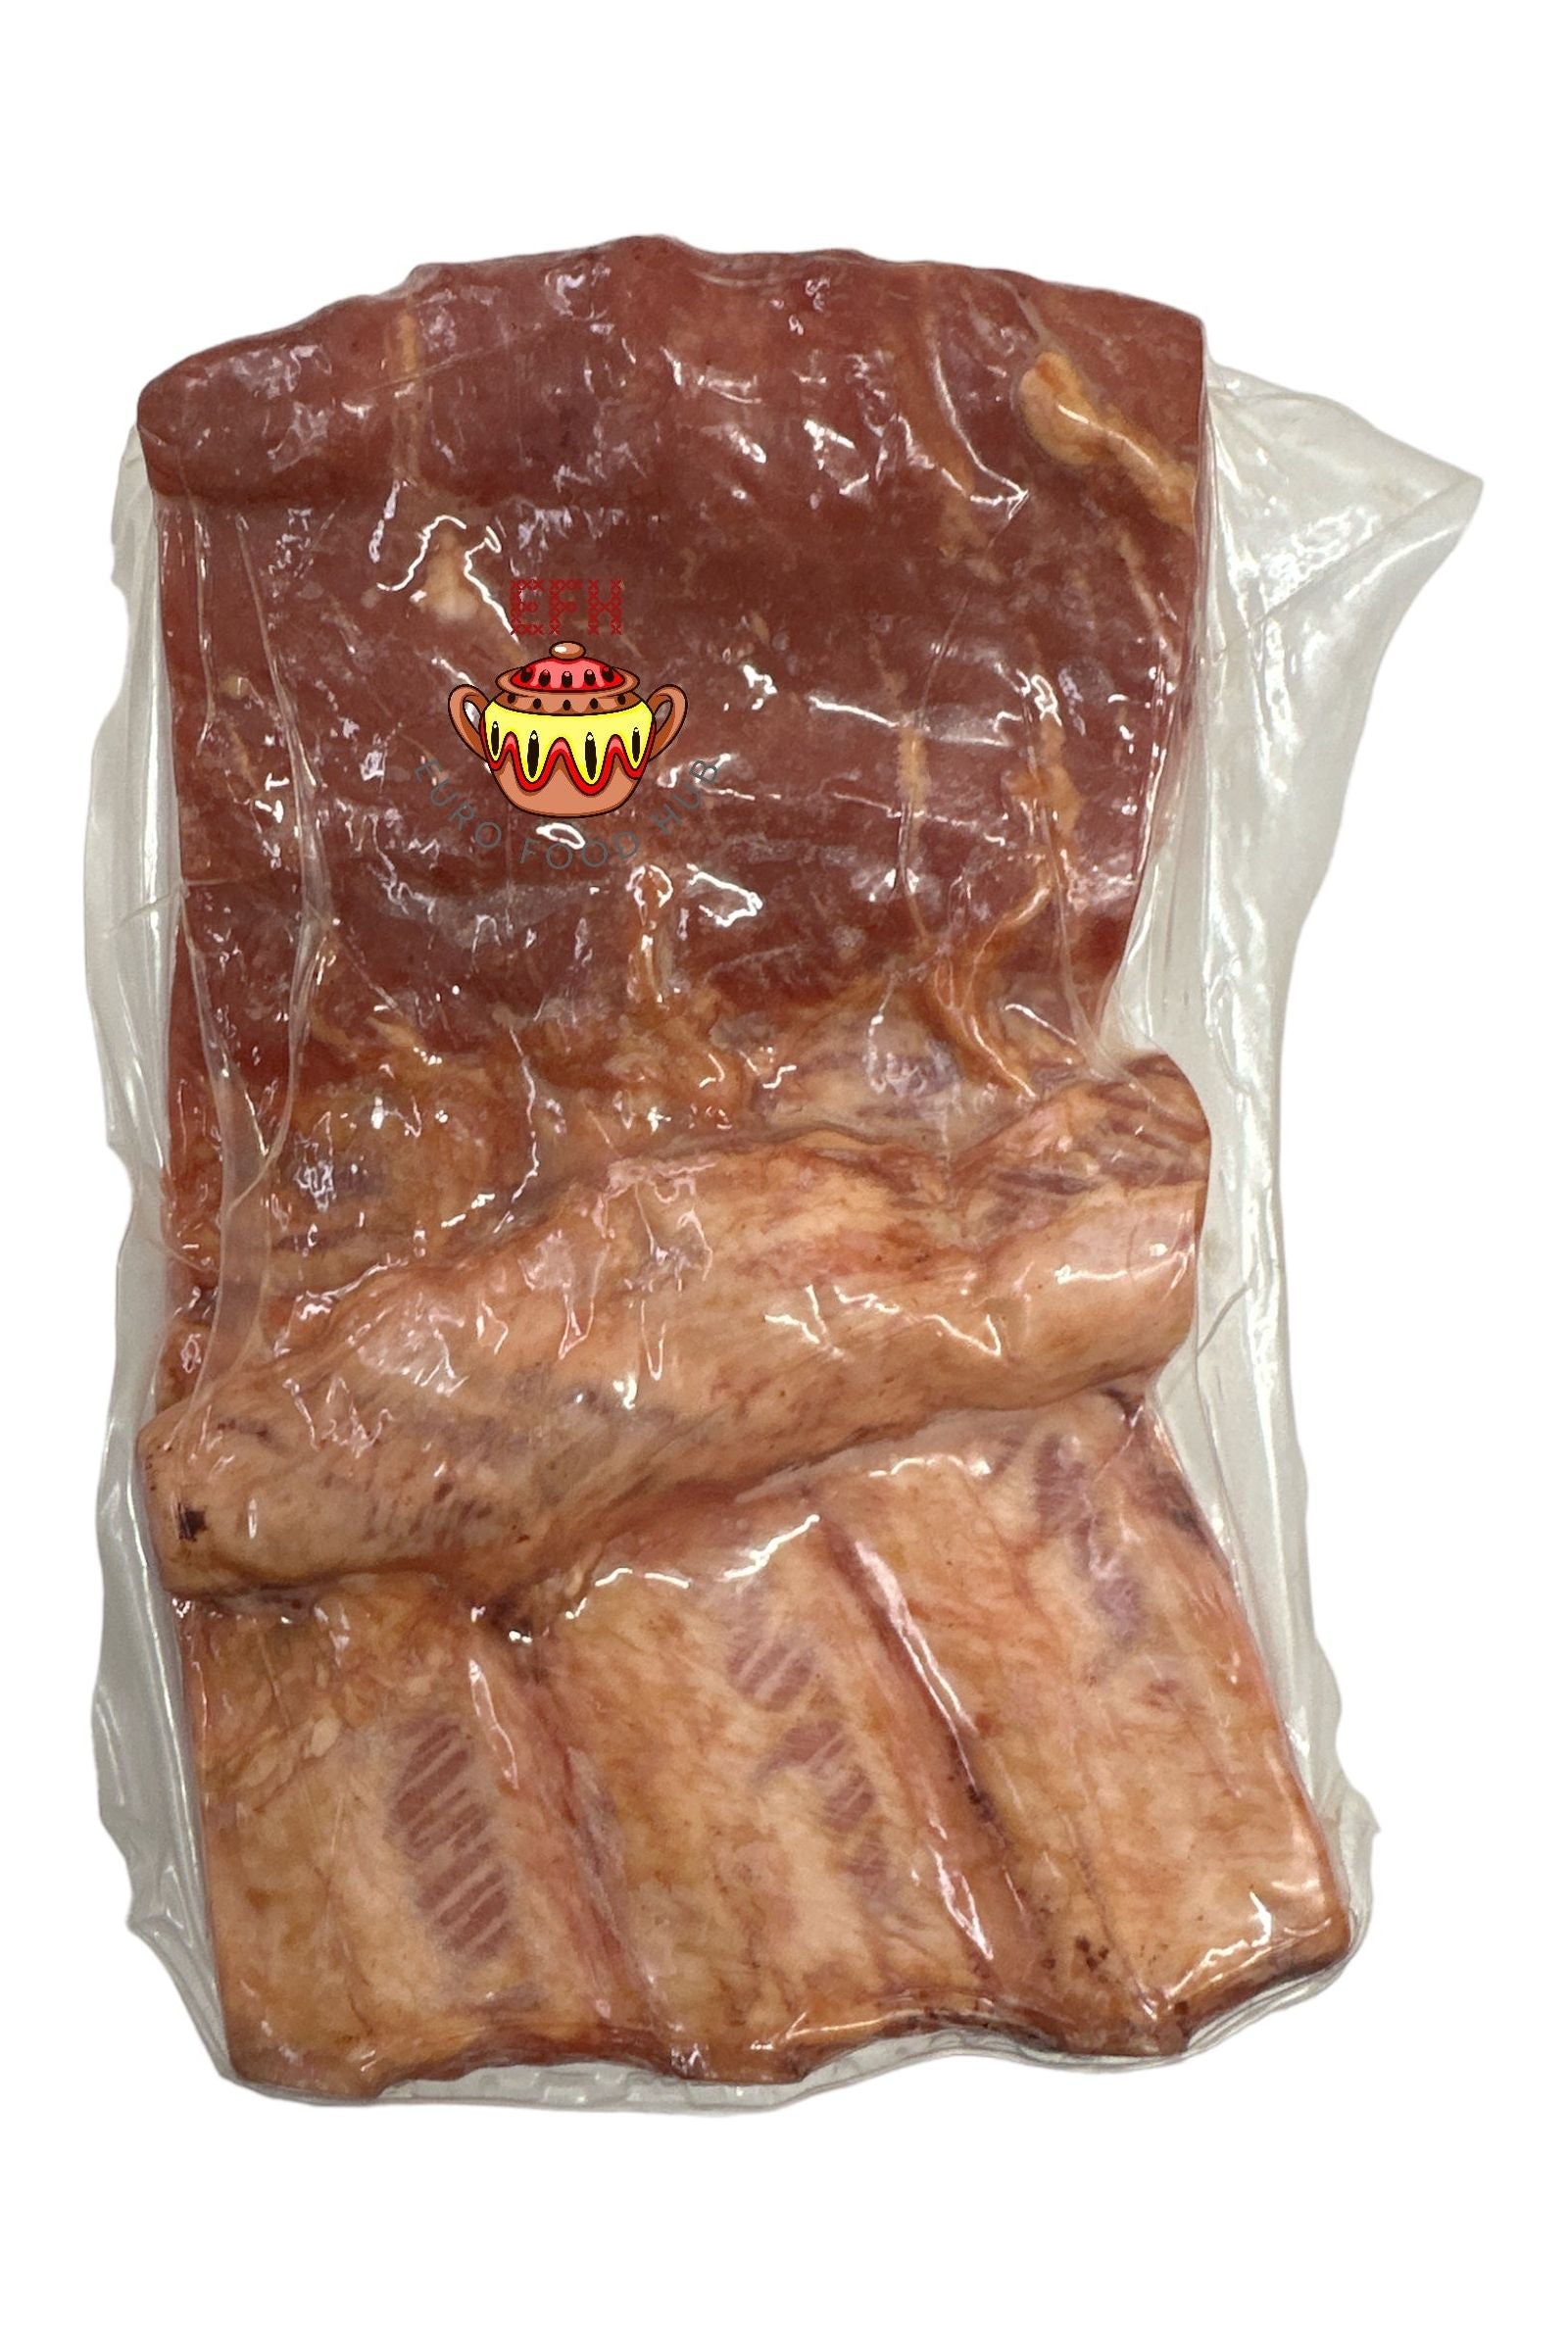 Smoked Baby Spare Ribs - Traditii Romanesti - Fully Cooked